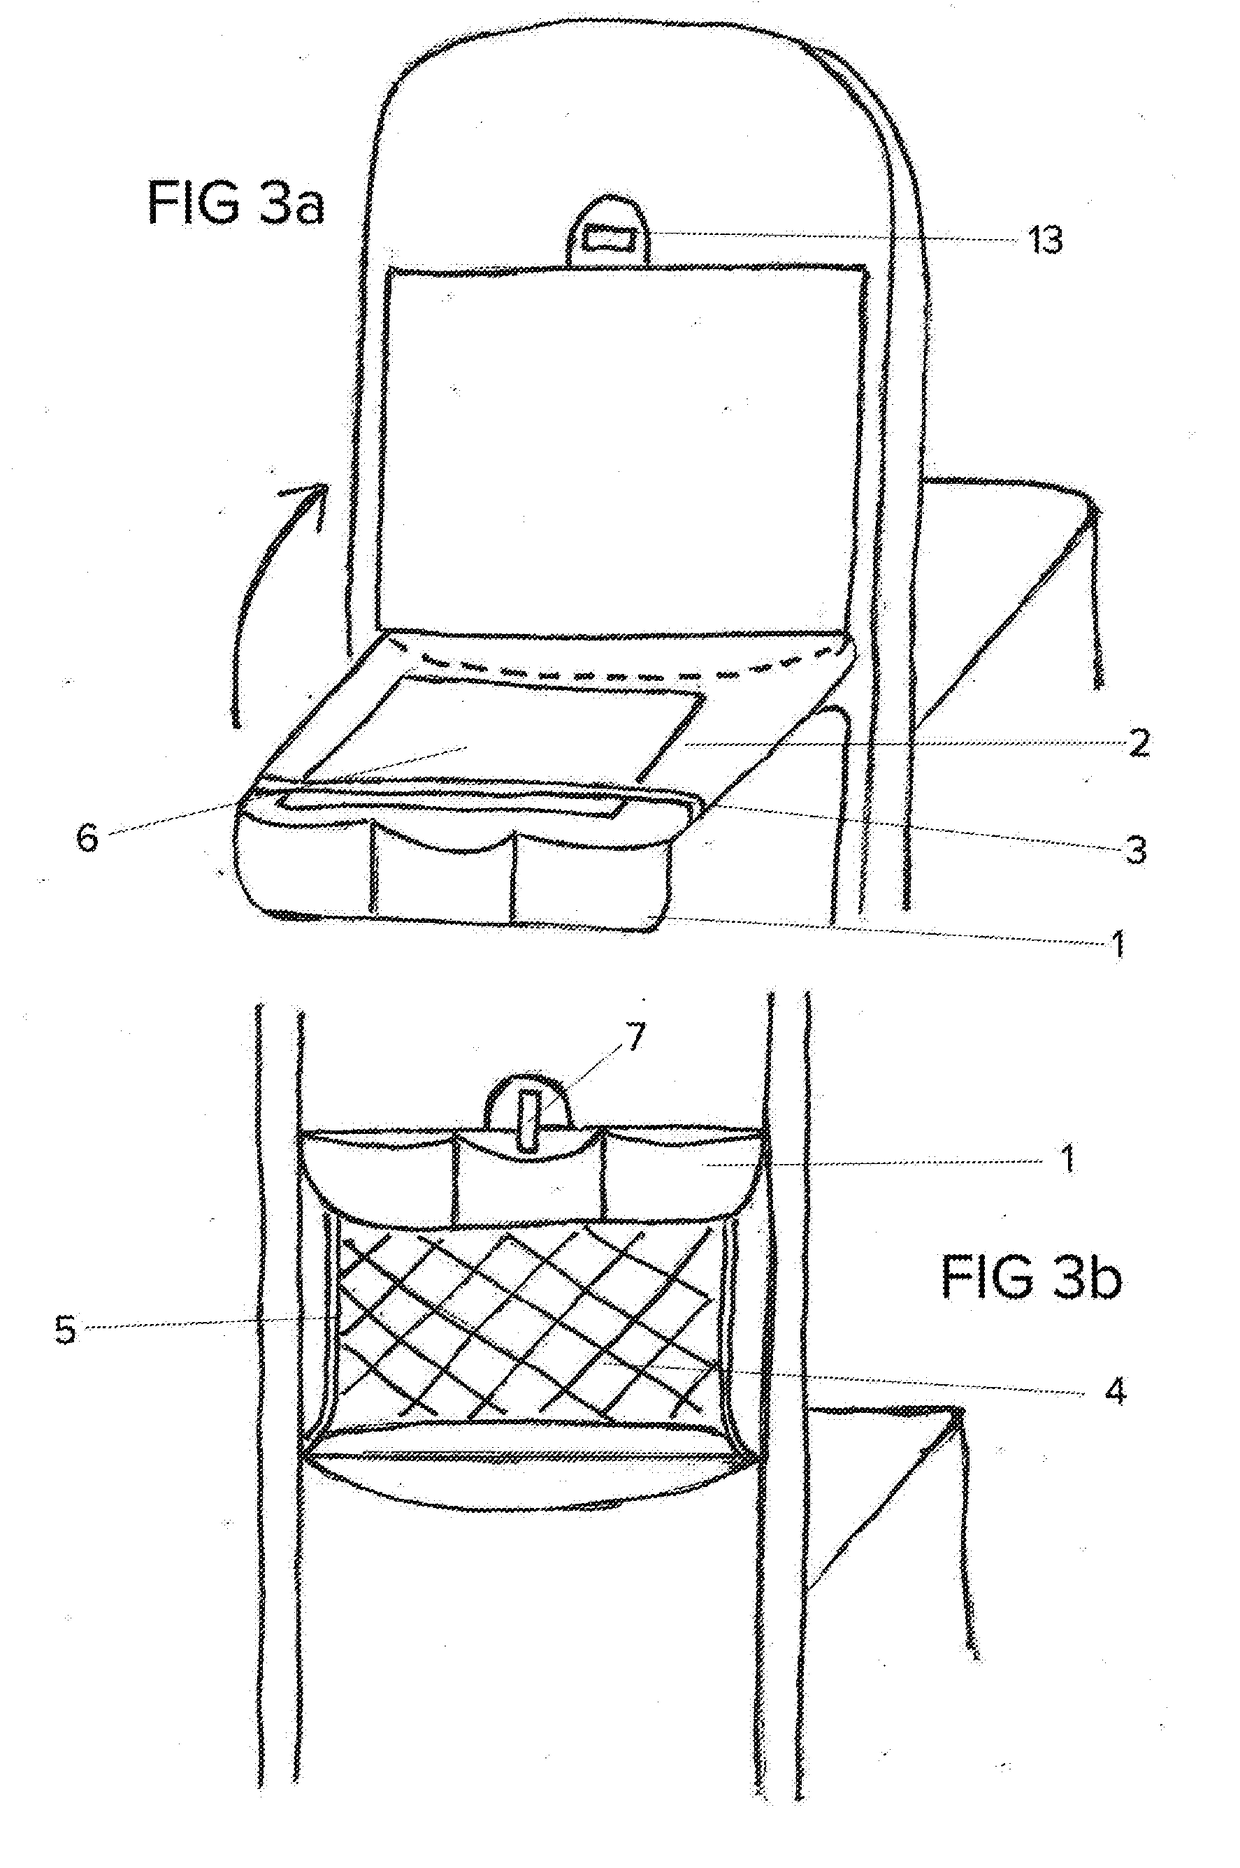 Cloth Tray Cover For Tray Tables Found On Airplanes, Trains Or Cars, Having Assorted Pockets Of Diverse Utility, Including A Clear Sleeve Pocket On The Surface Of The Tray, An Adjustable Viewing Pocket For Electronic Devices, And A Collapsible Drink Holder For Use When The Tray Table Is In The Locked Position